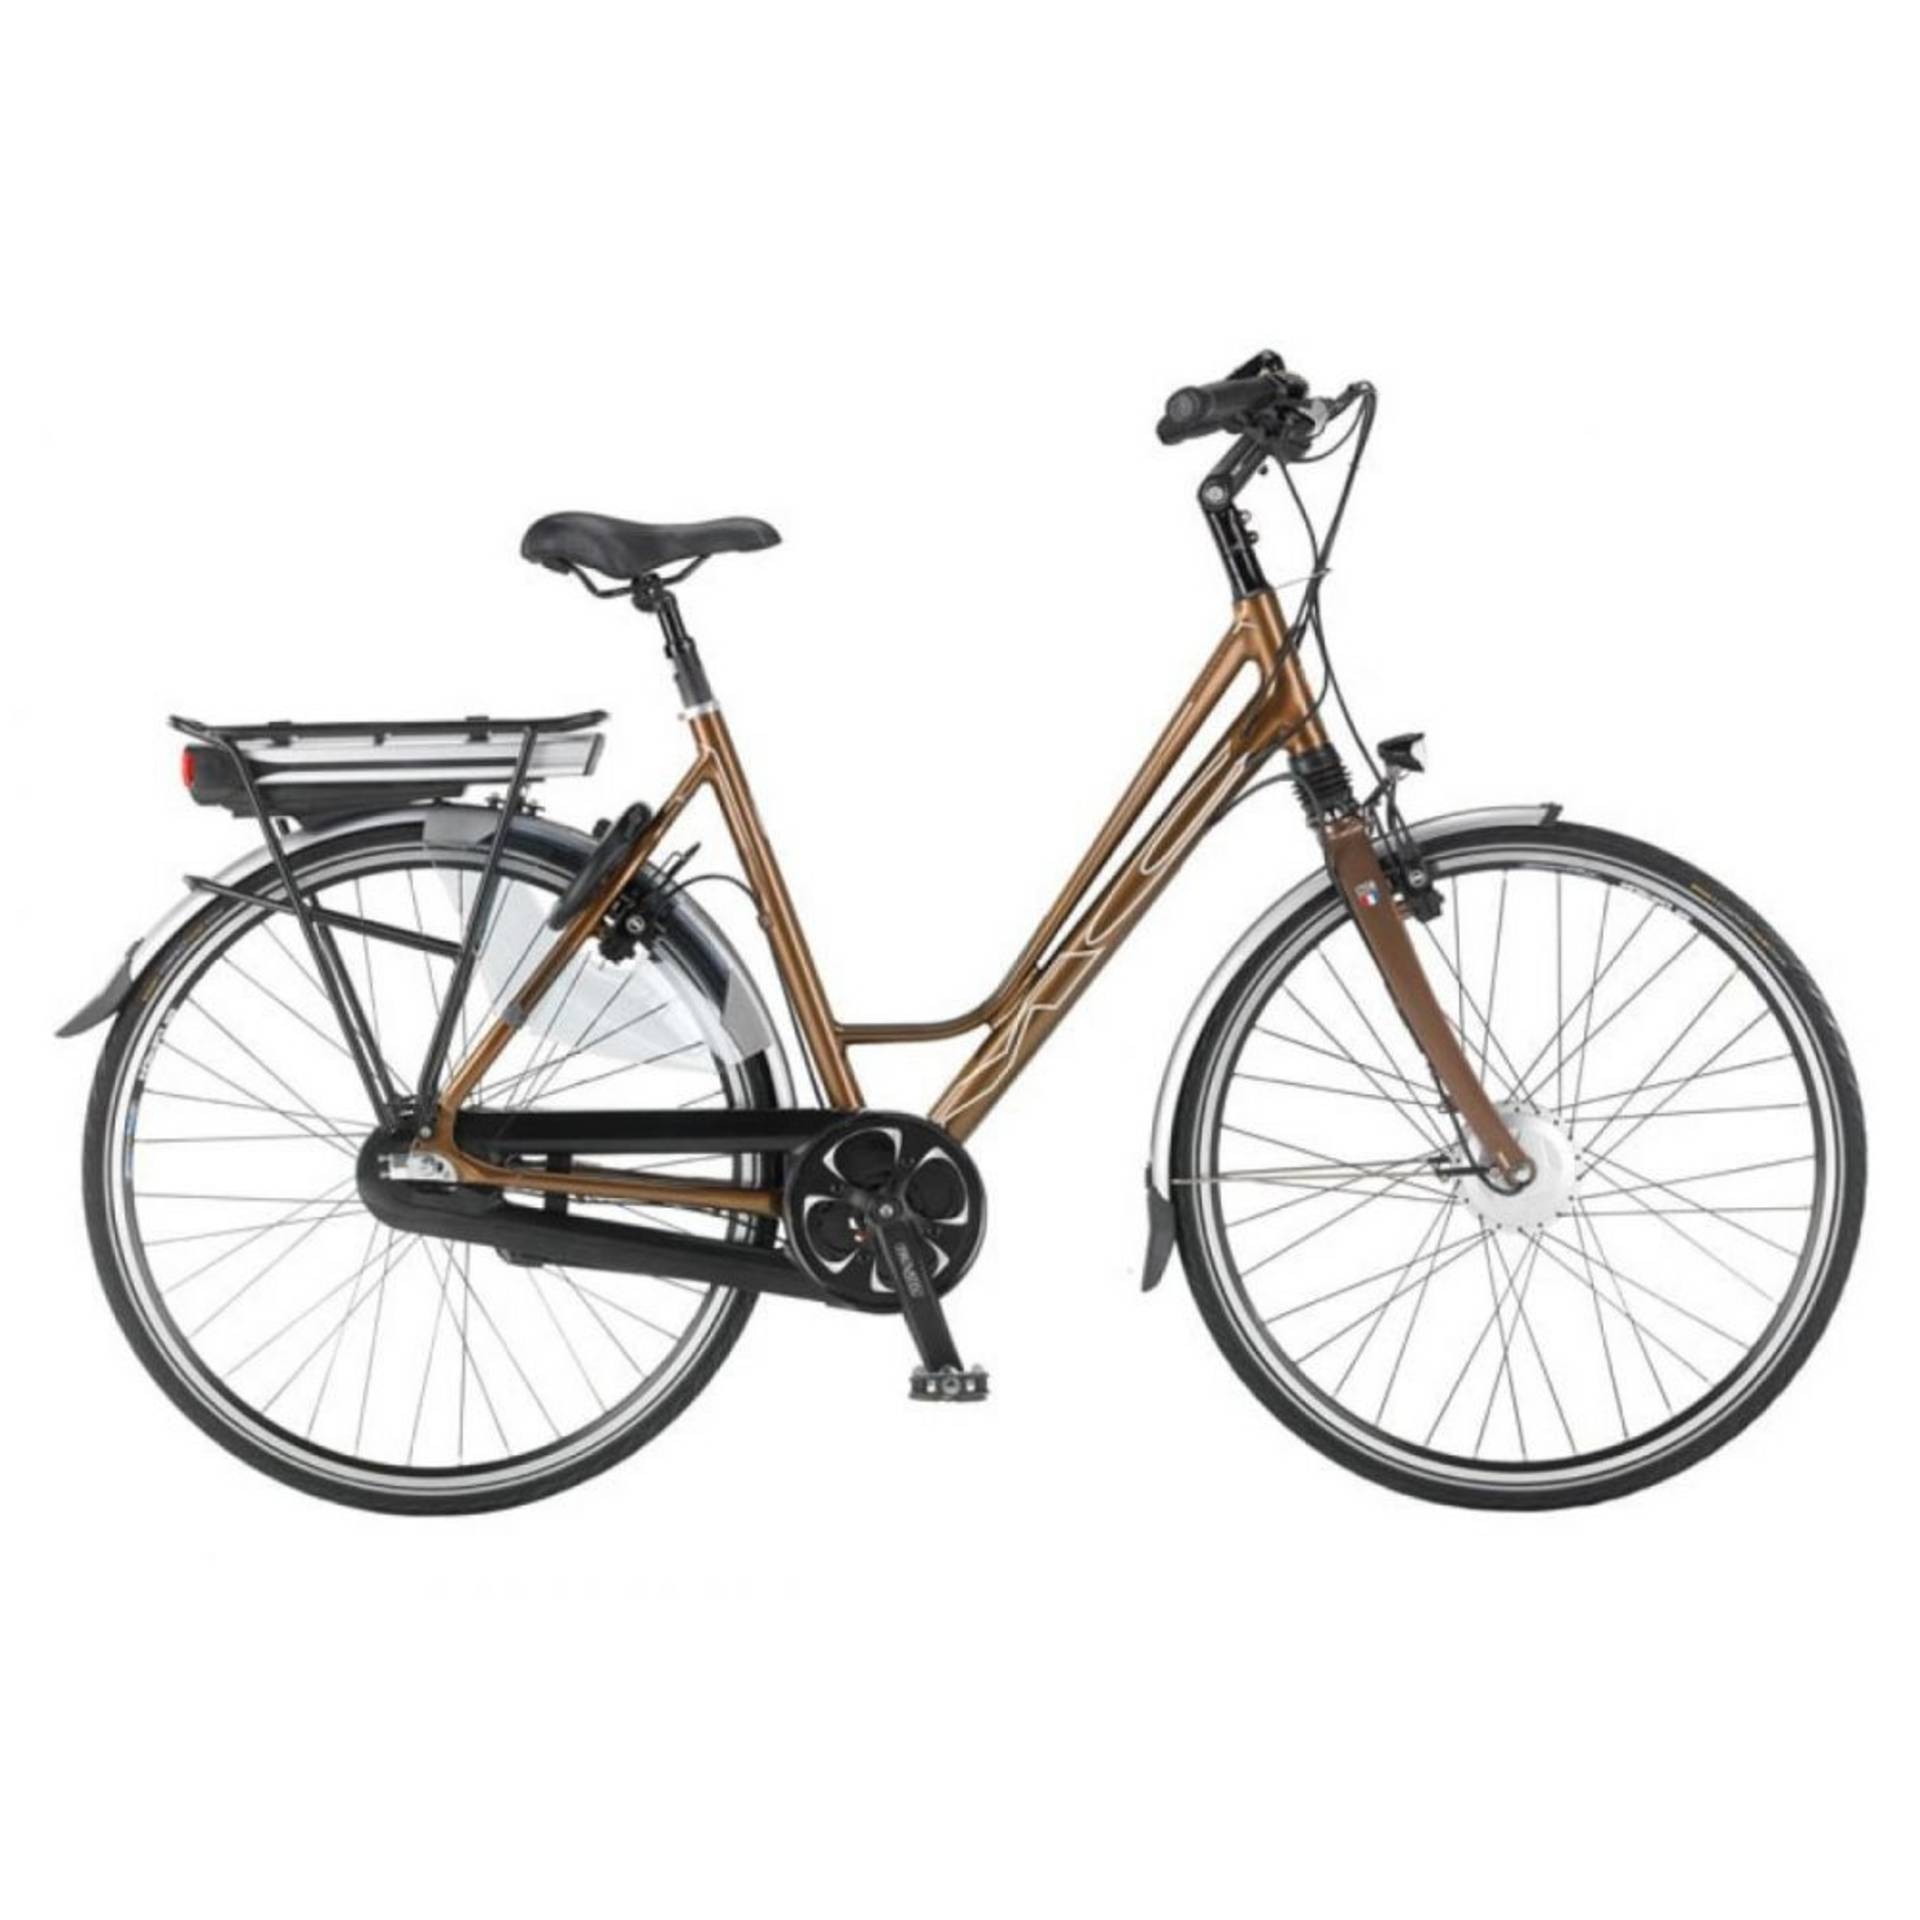 Multicycle Expressive Dames Chocolate Brown Metallic 53cm 2018 - 1/1